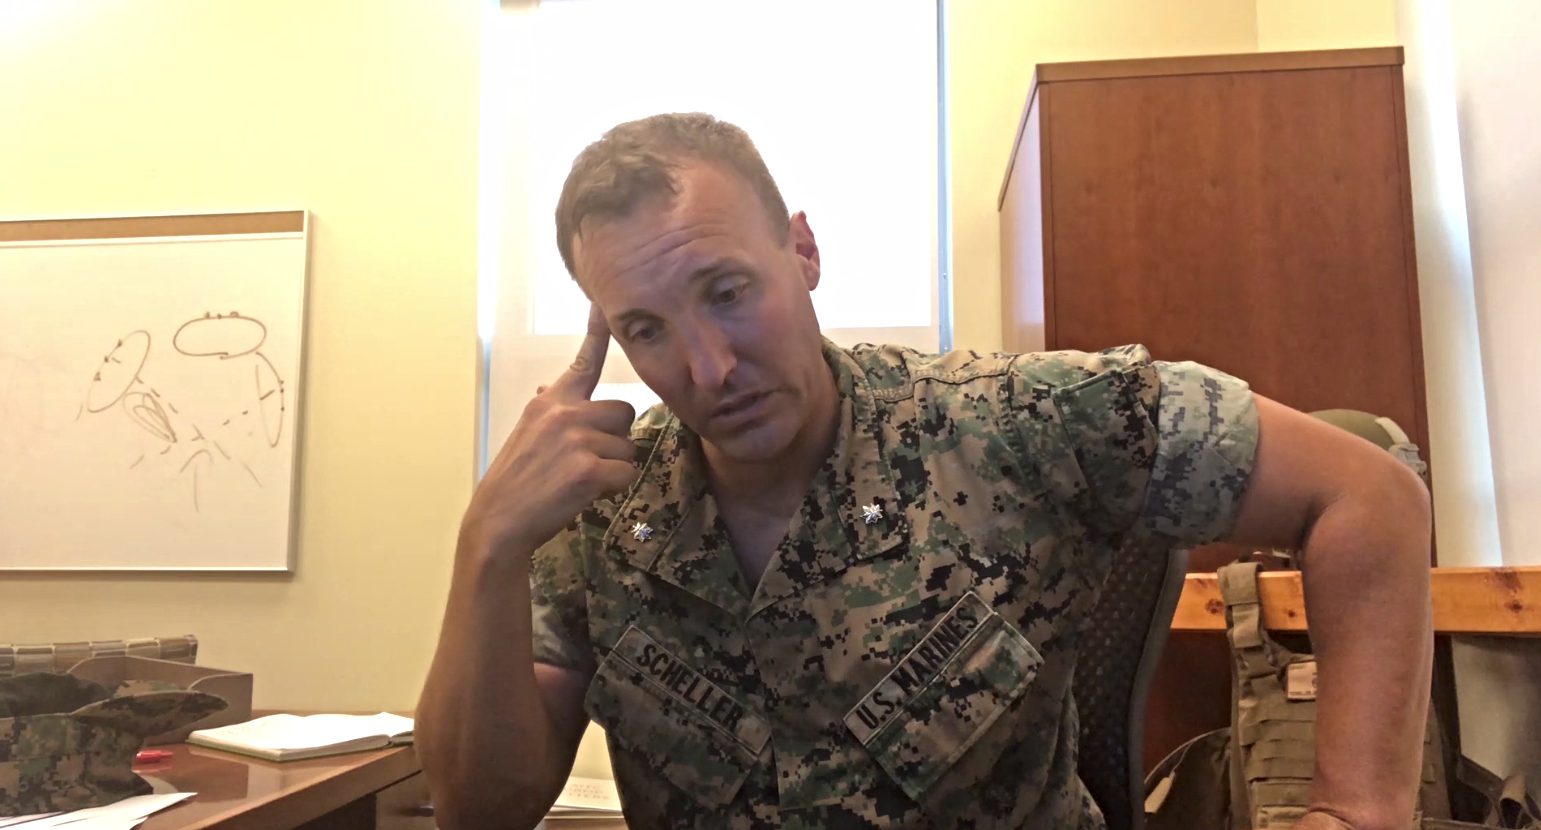 marine-fired-for-criticizing-military-leaders-resigns,-says-chasing-stability-makes-‘slave-to-the-system’